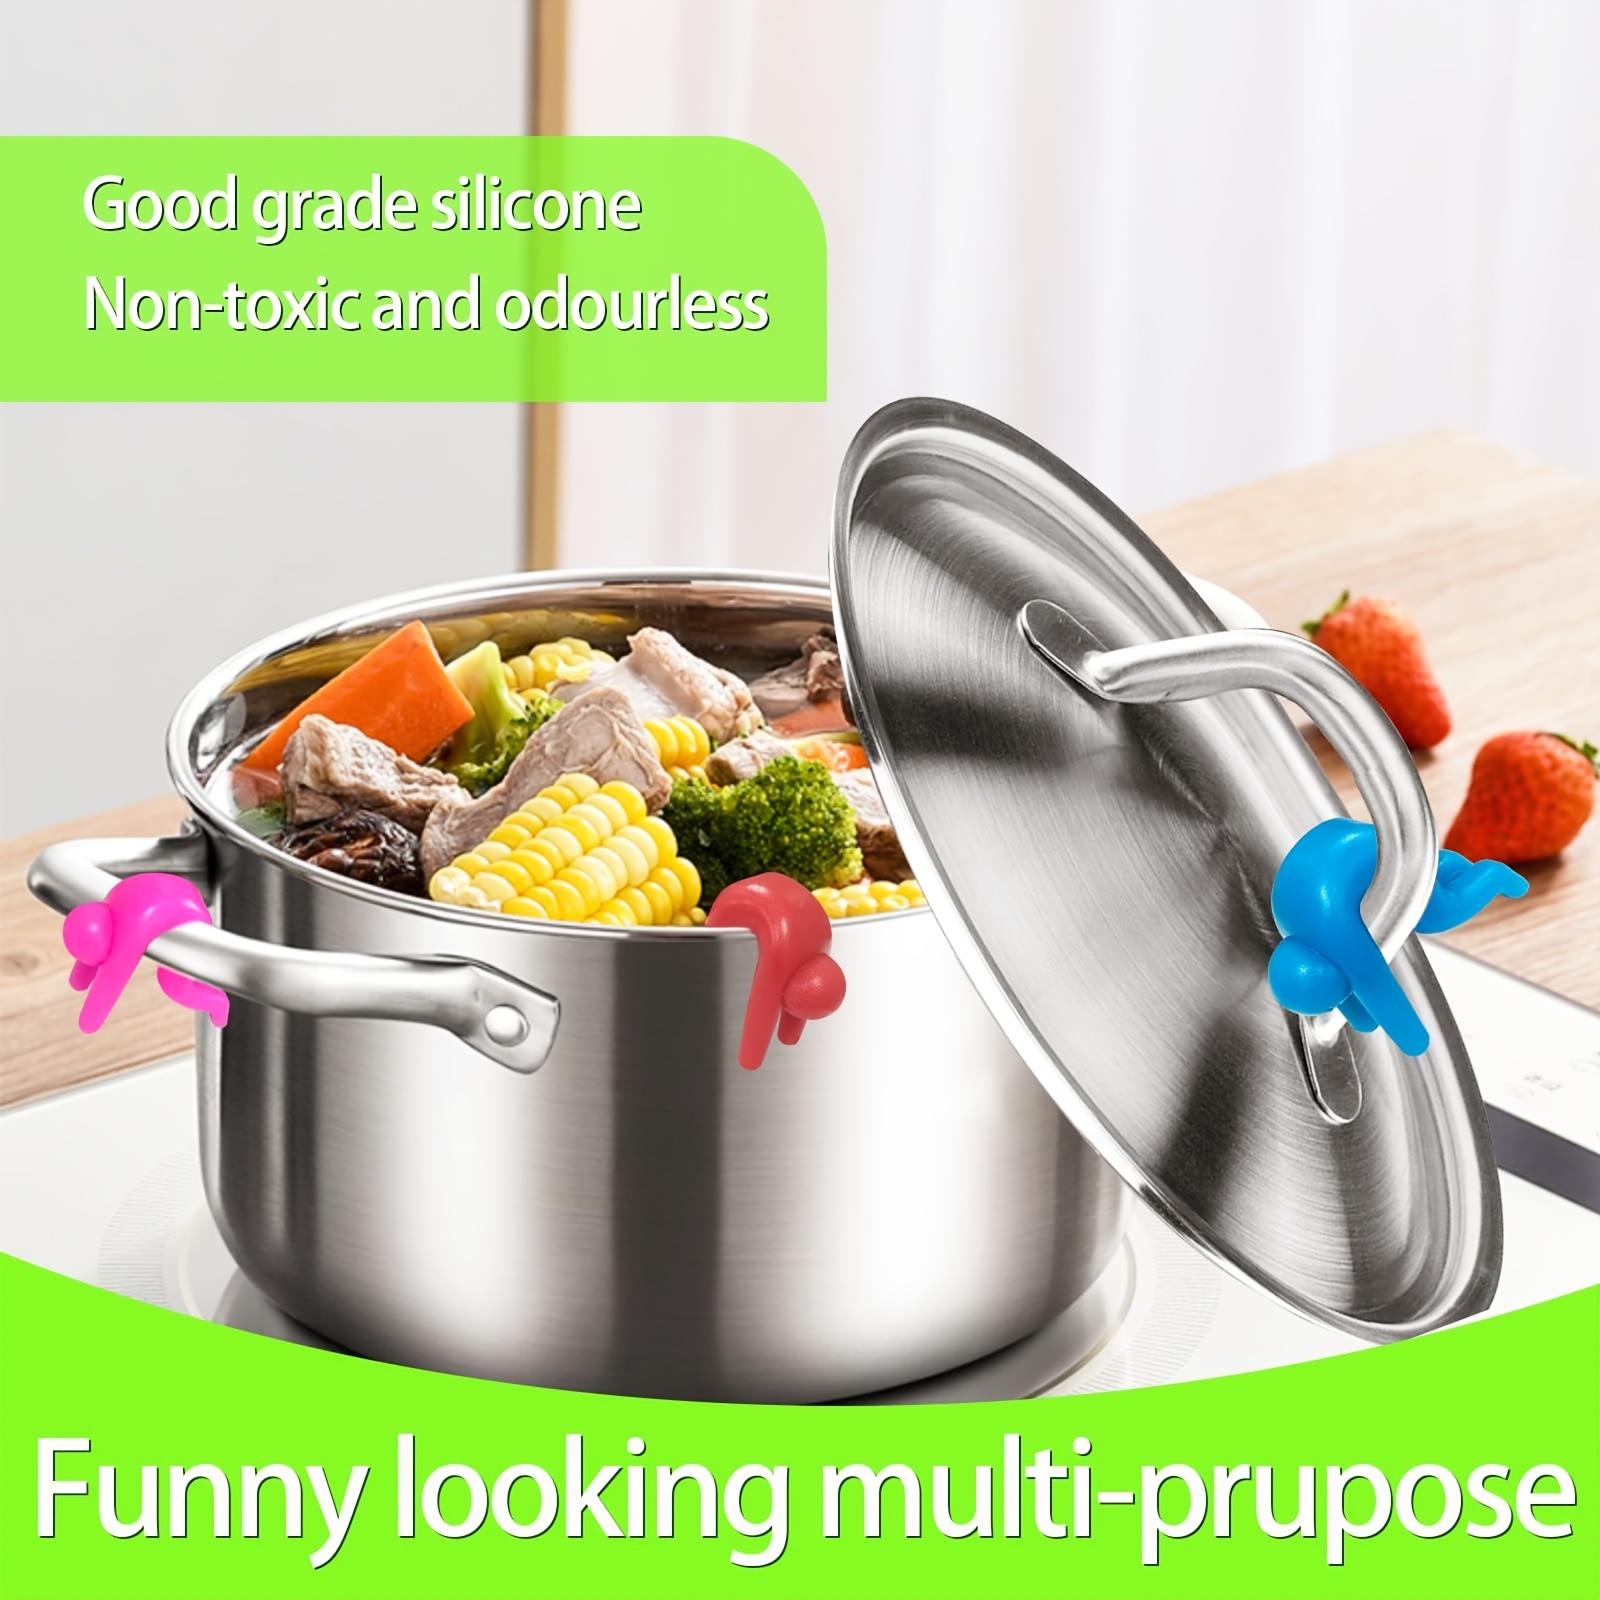 Lid Sid: Pot Lid Lifter | Pot Lid Holder that Keeps Pot from Boiling over |  Helpful Kitchen Gadget to Reduce Soups and Stews | Cool Kitchen Gadgets 